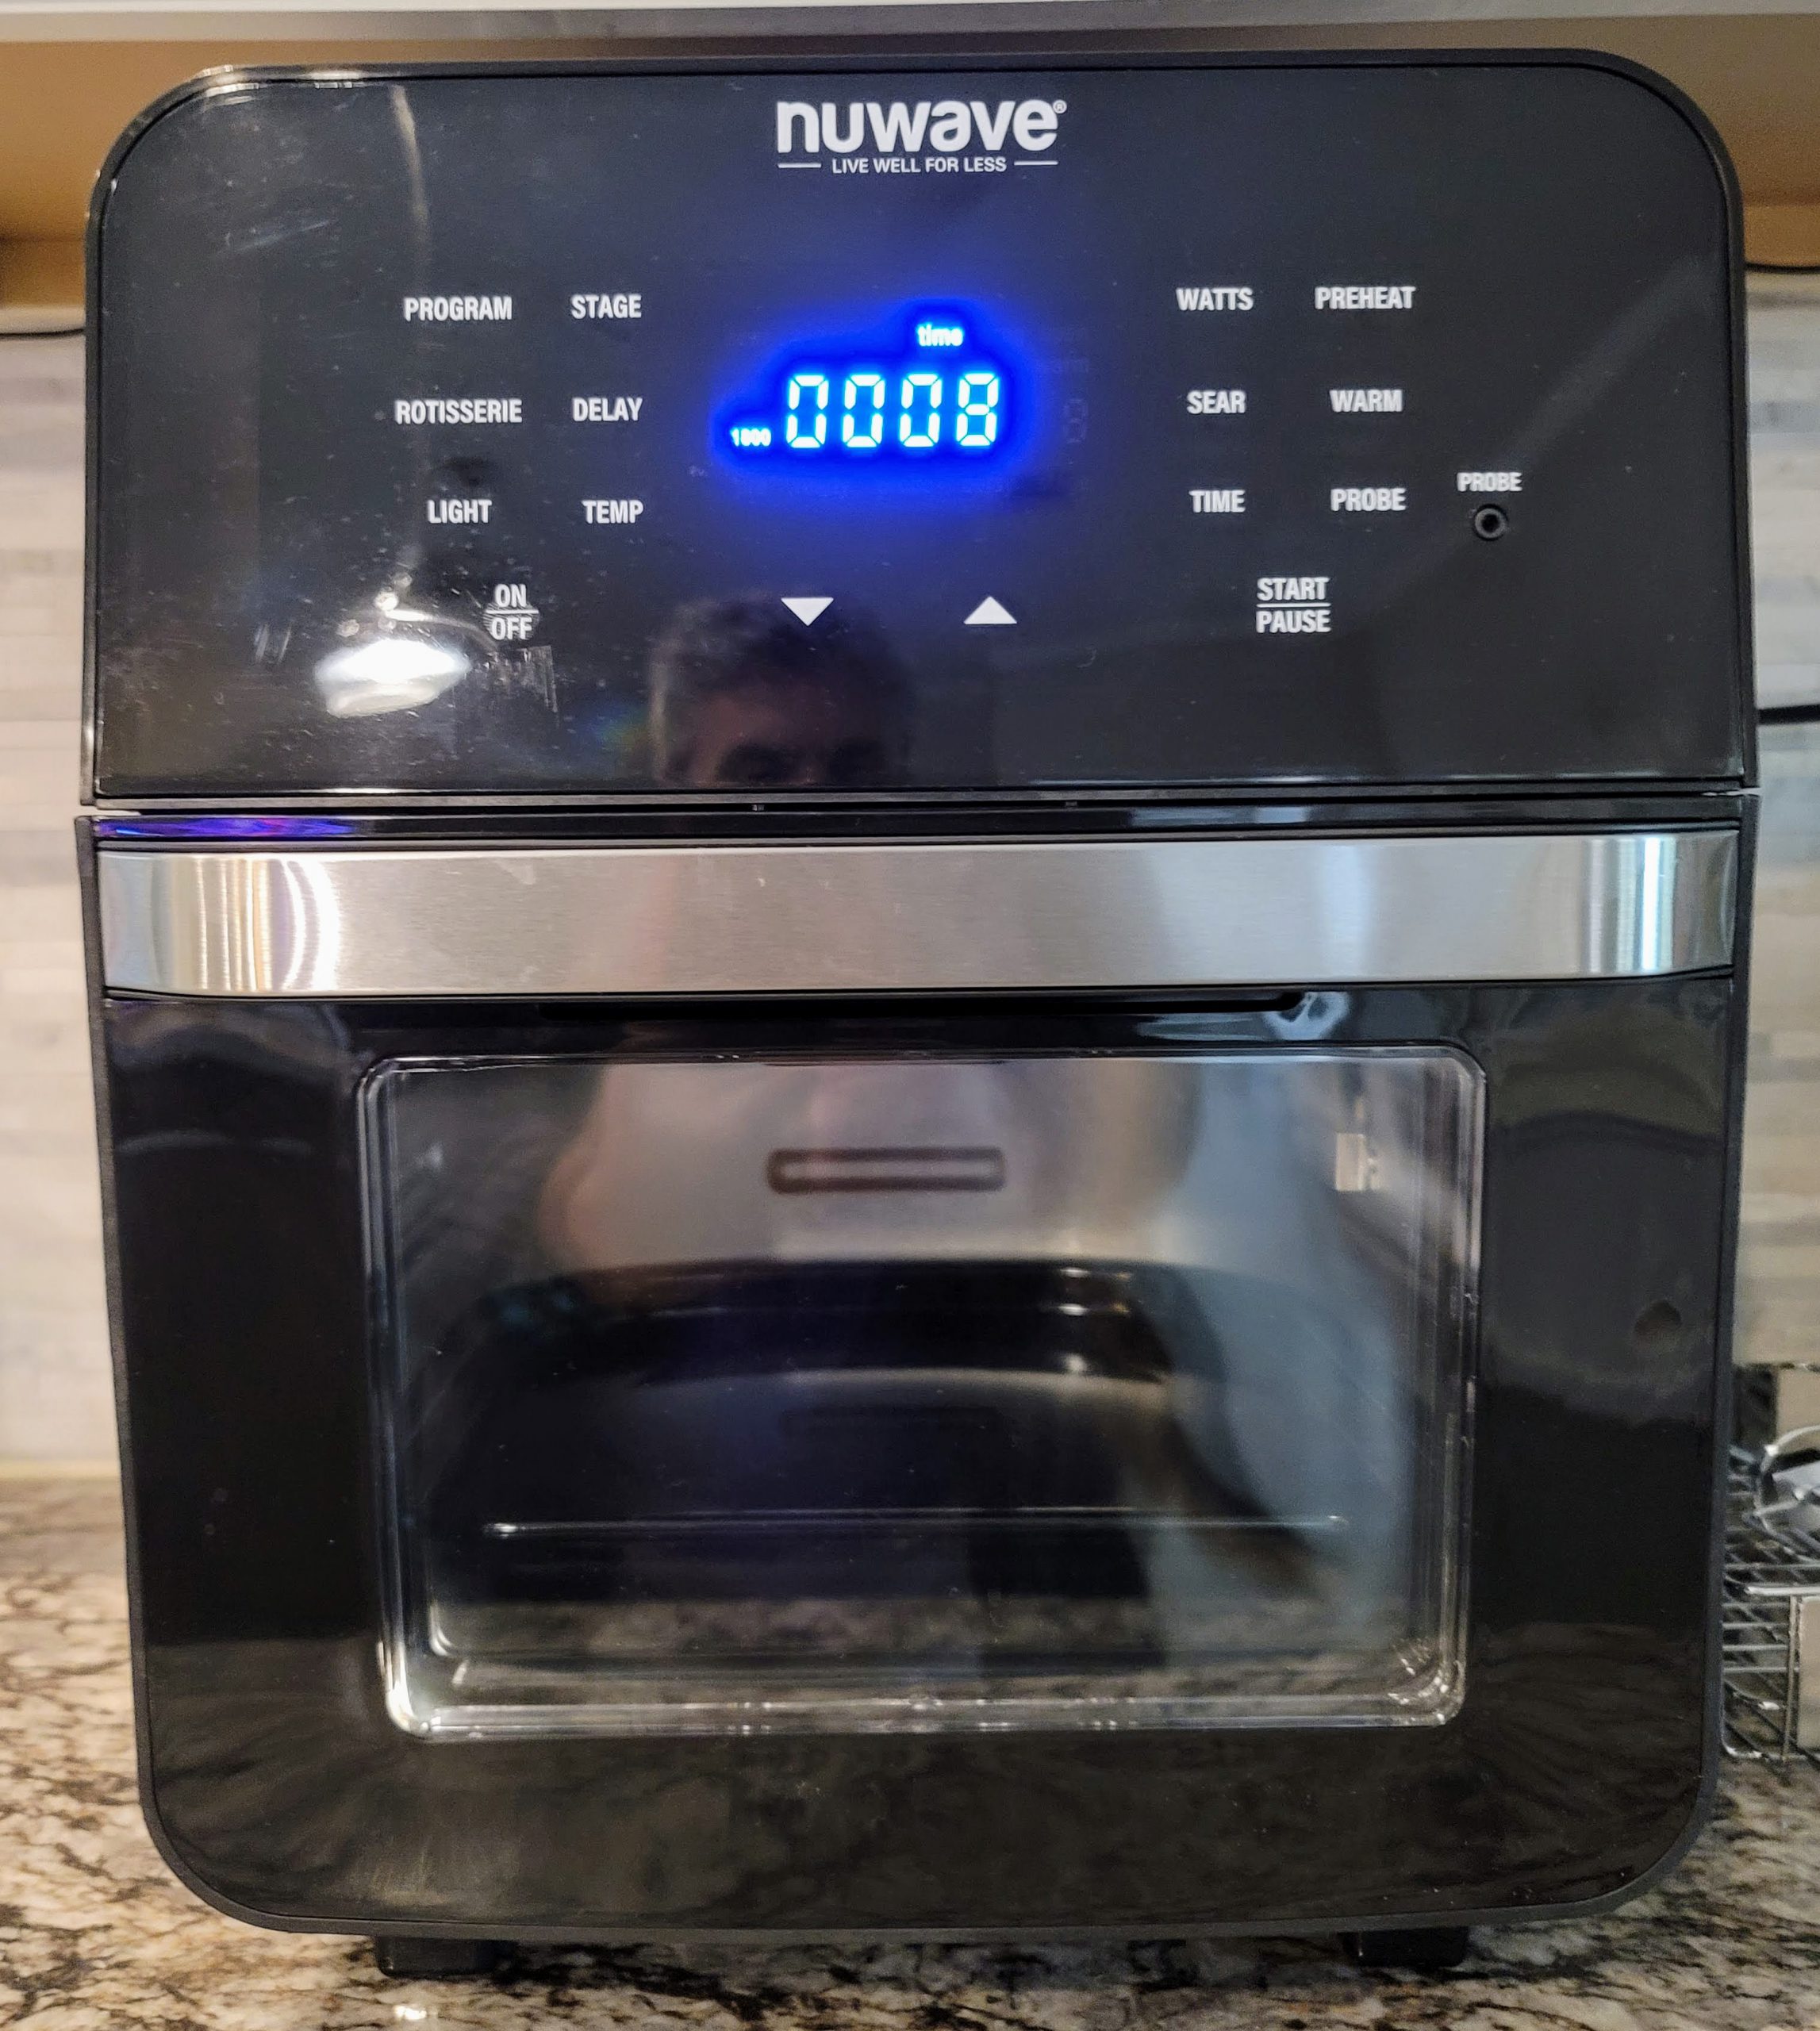 Nuwave Brio 10 Quart Air Fryer Quick Review and First Cook! 